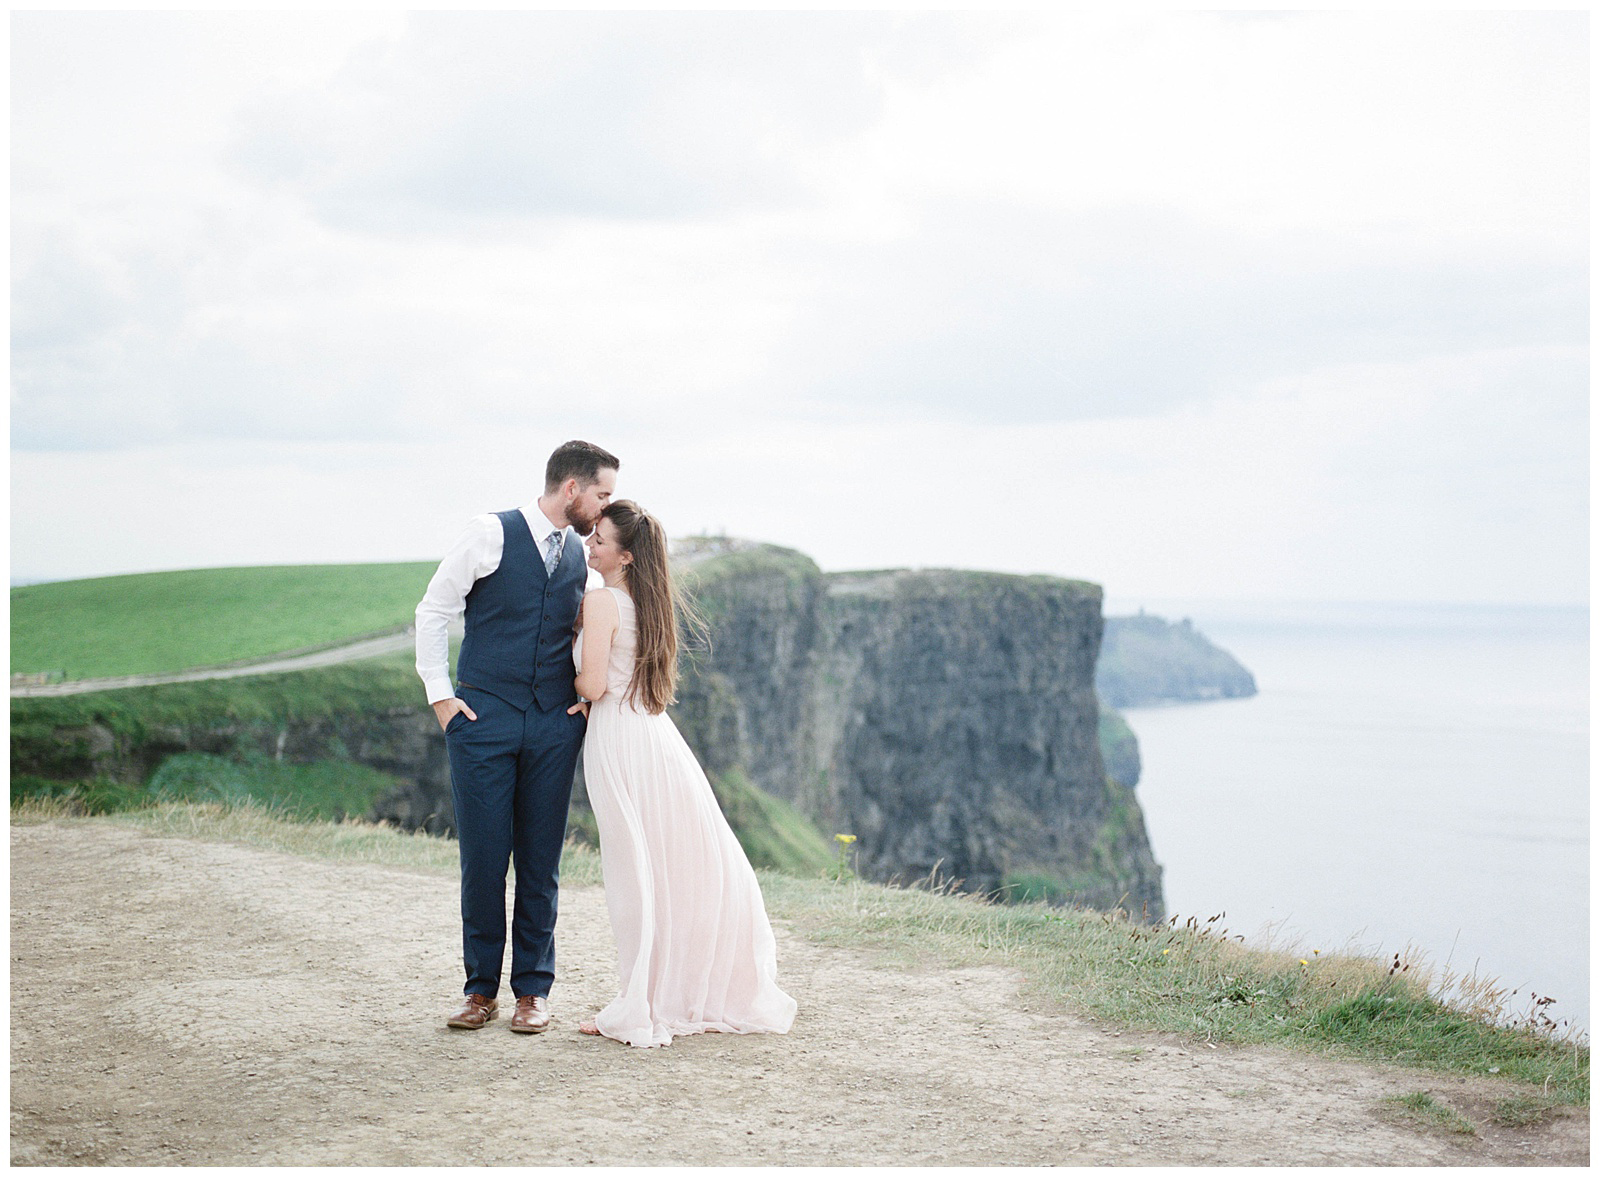 Luxury Destination Wedding Photographer Cliffs of Moher Anniversary Session on Film with Sarah Sunstrom Photography_0001.jpg